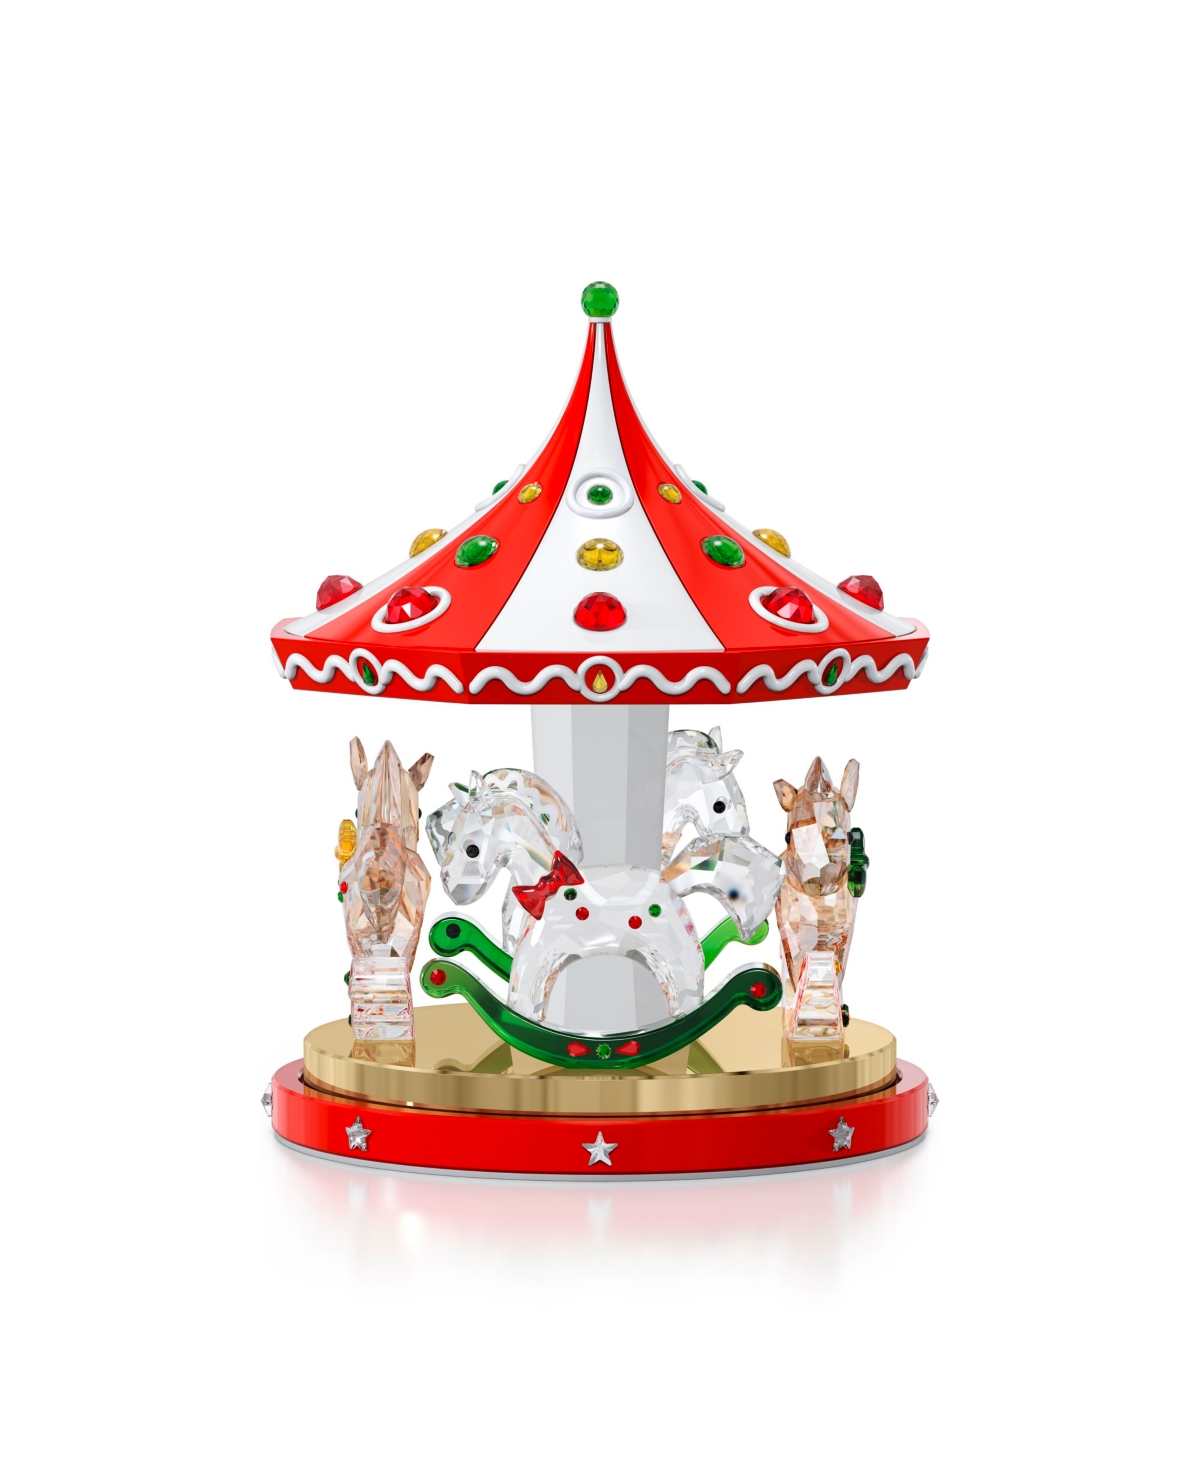 Swarovski Holiday Cheers Carousel In Red